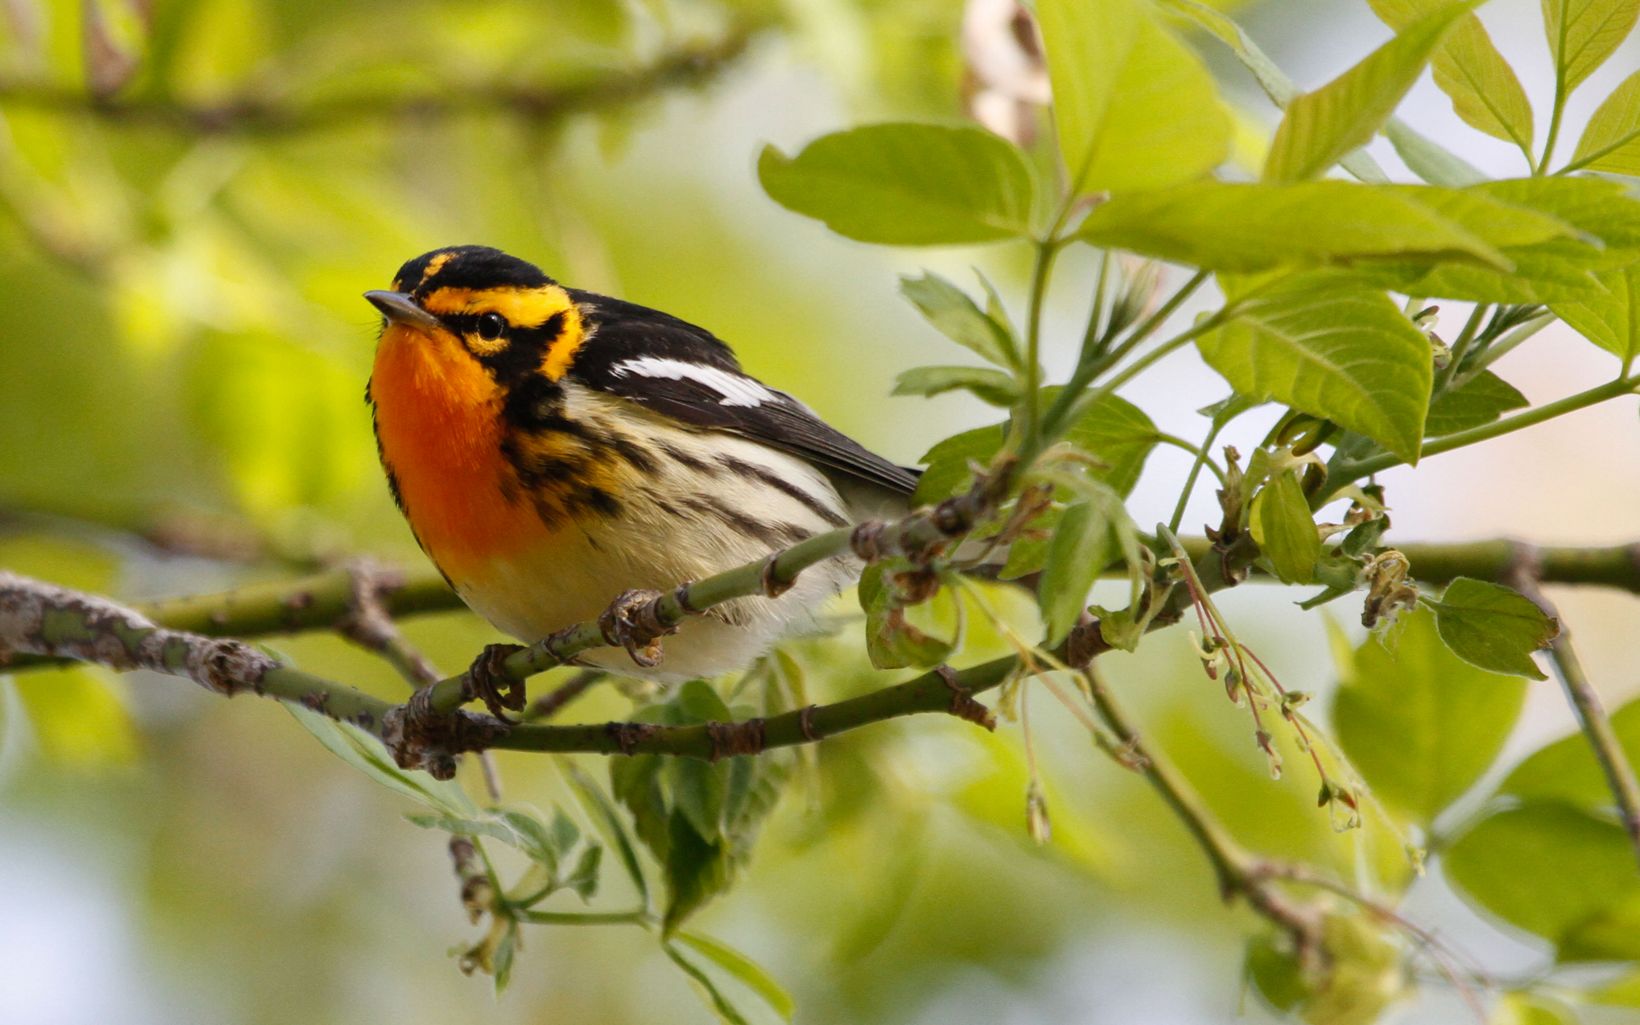 A small orange and black bird rests on a branch.